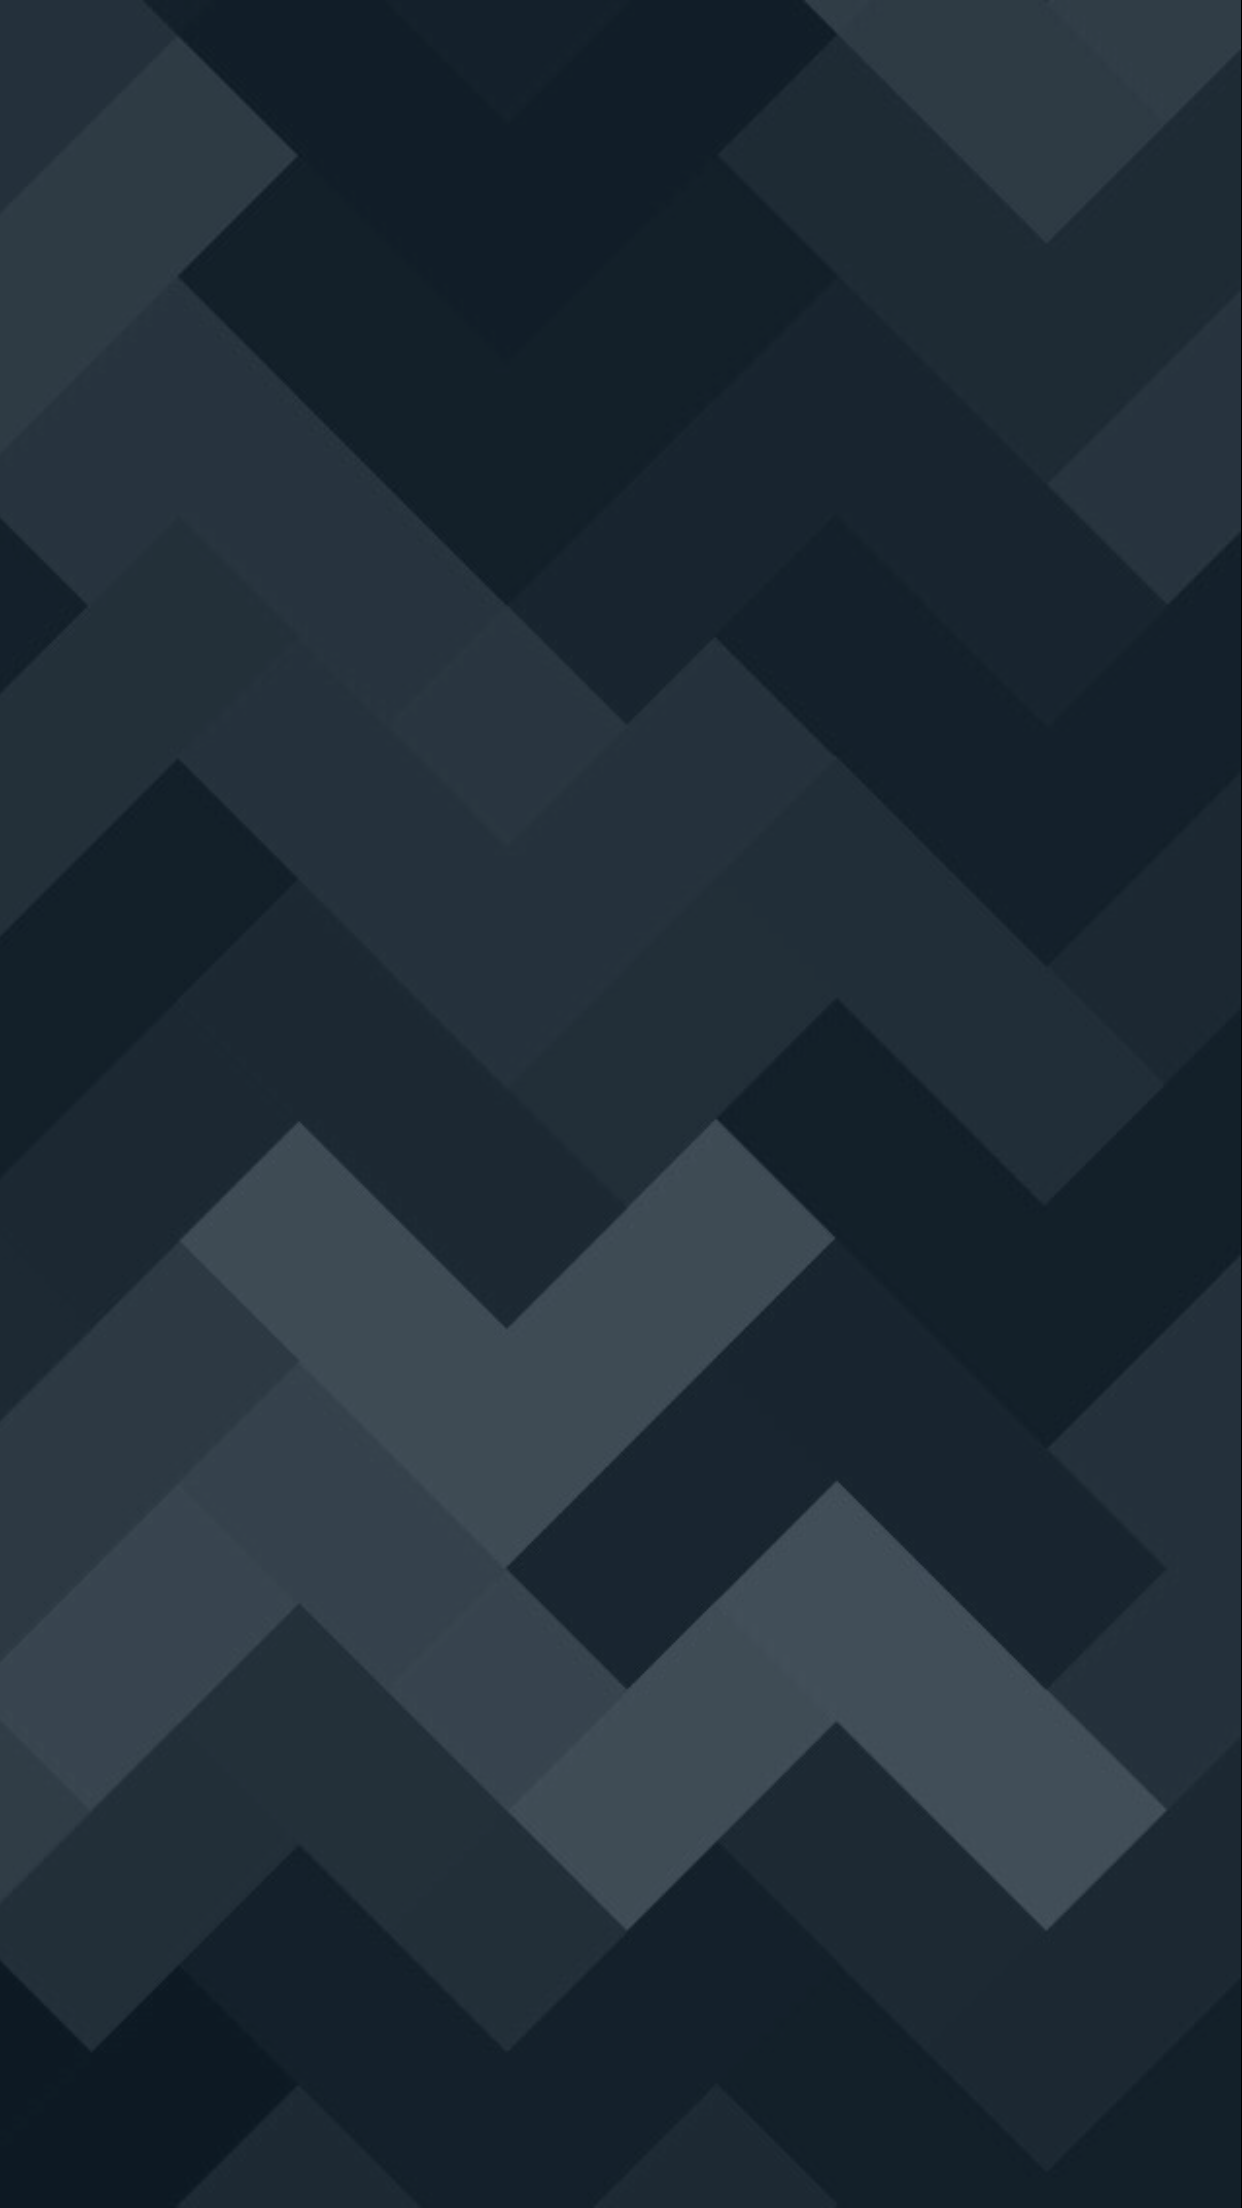 A beautiful collection of geometric wallpaper for iPhone